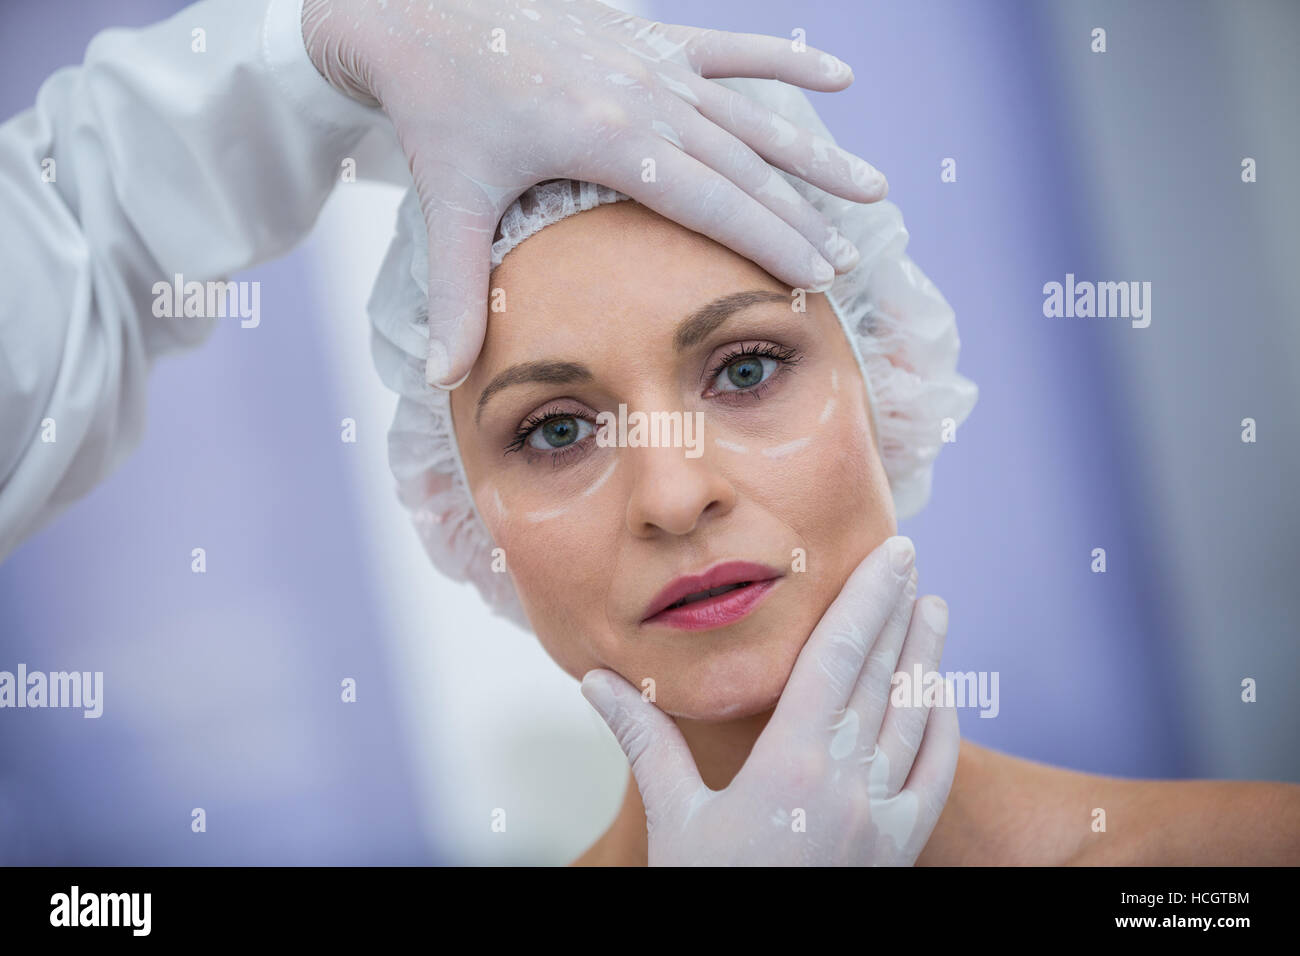 Doctor examining female patients face for cosmetic treatment Stock Photo